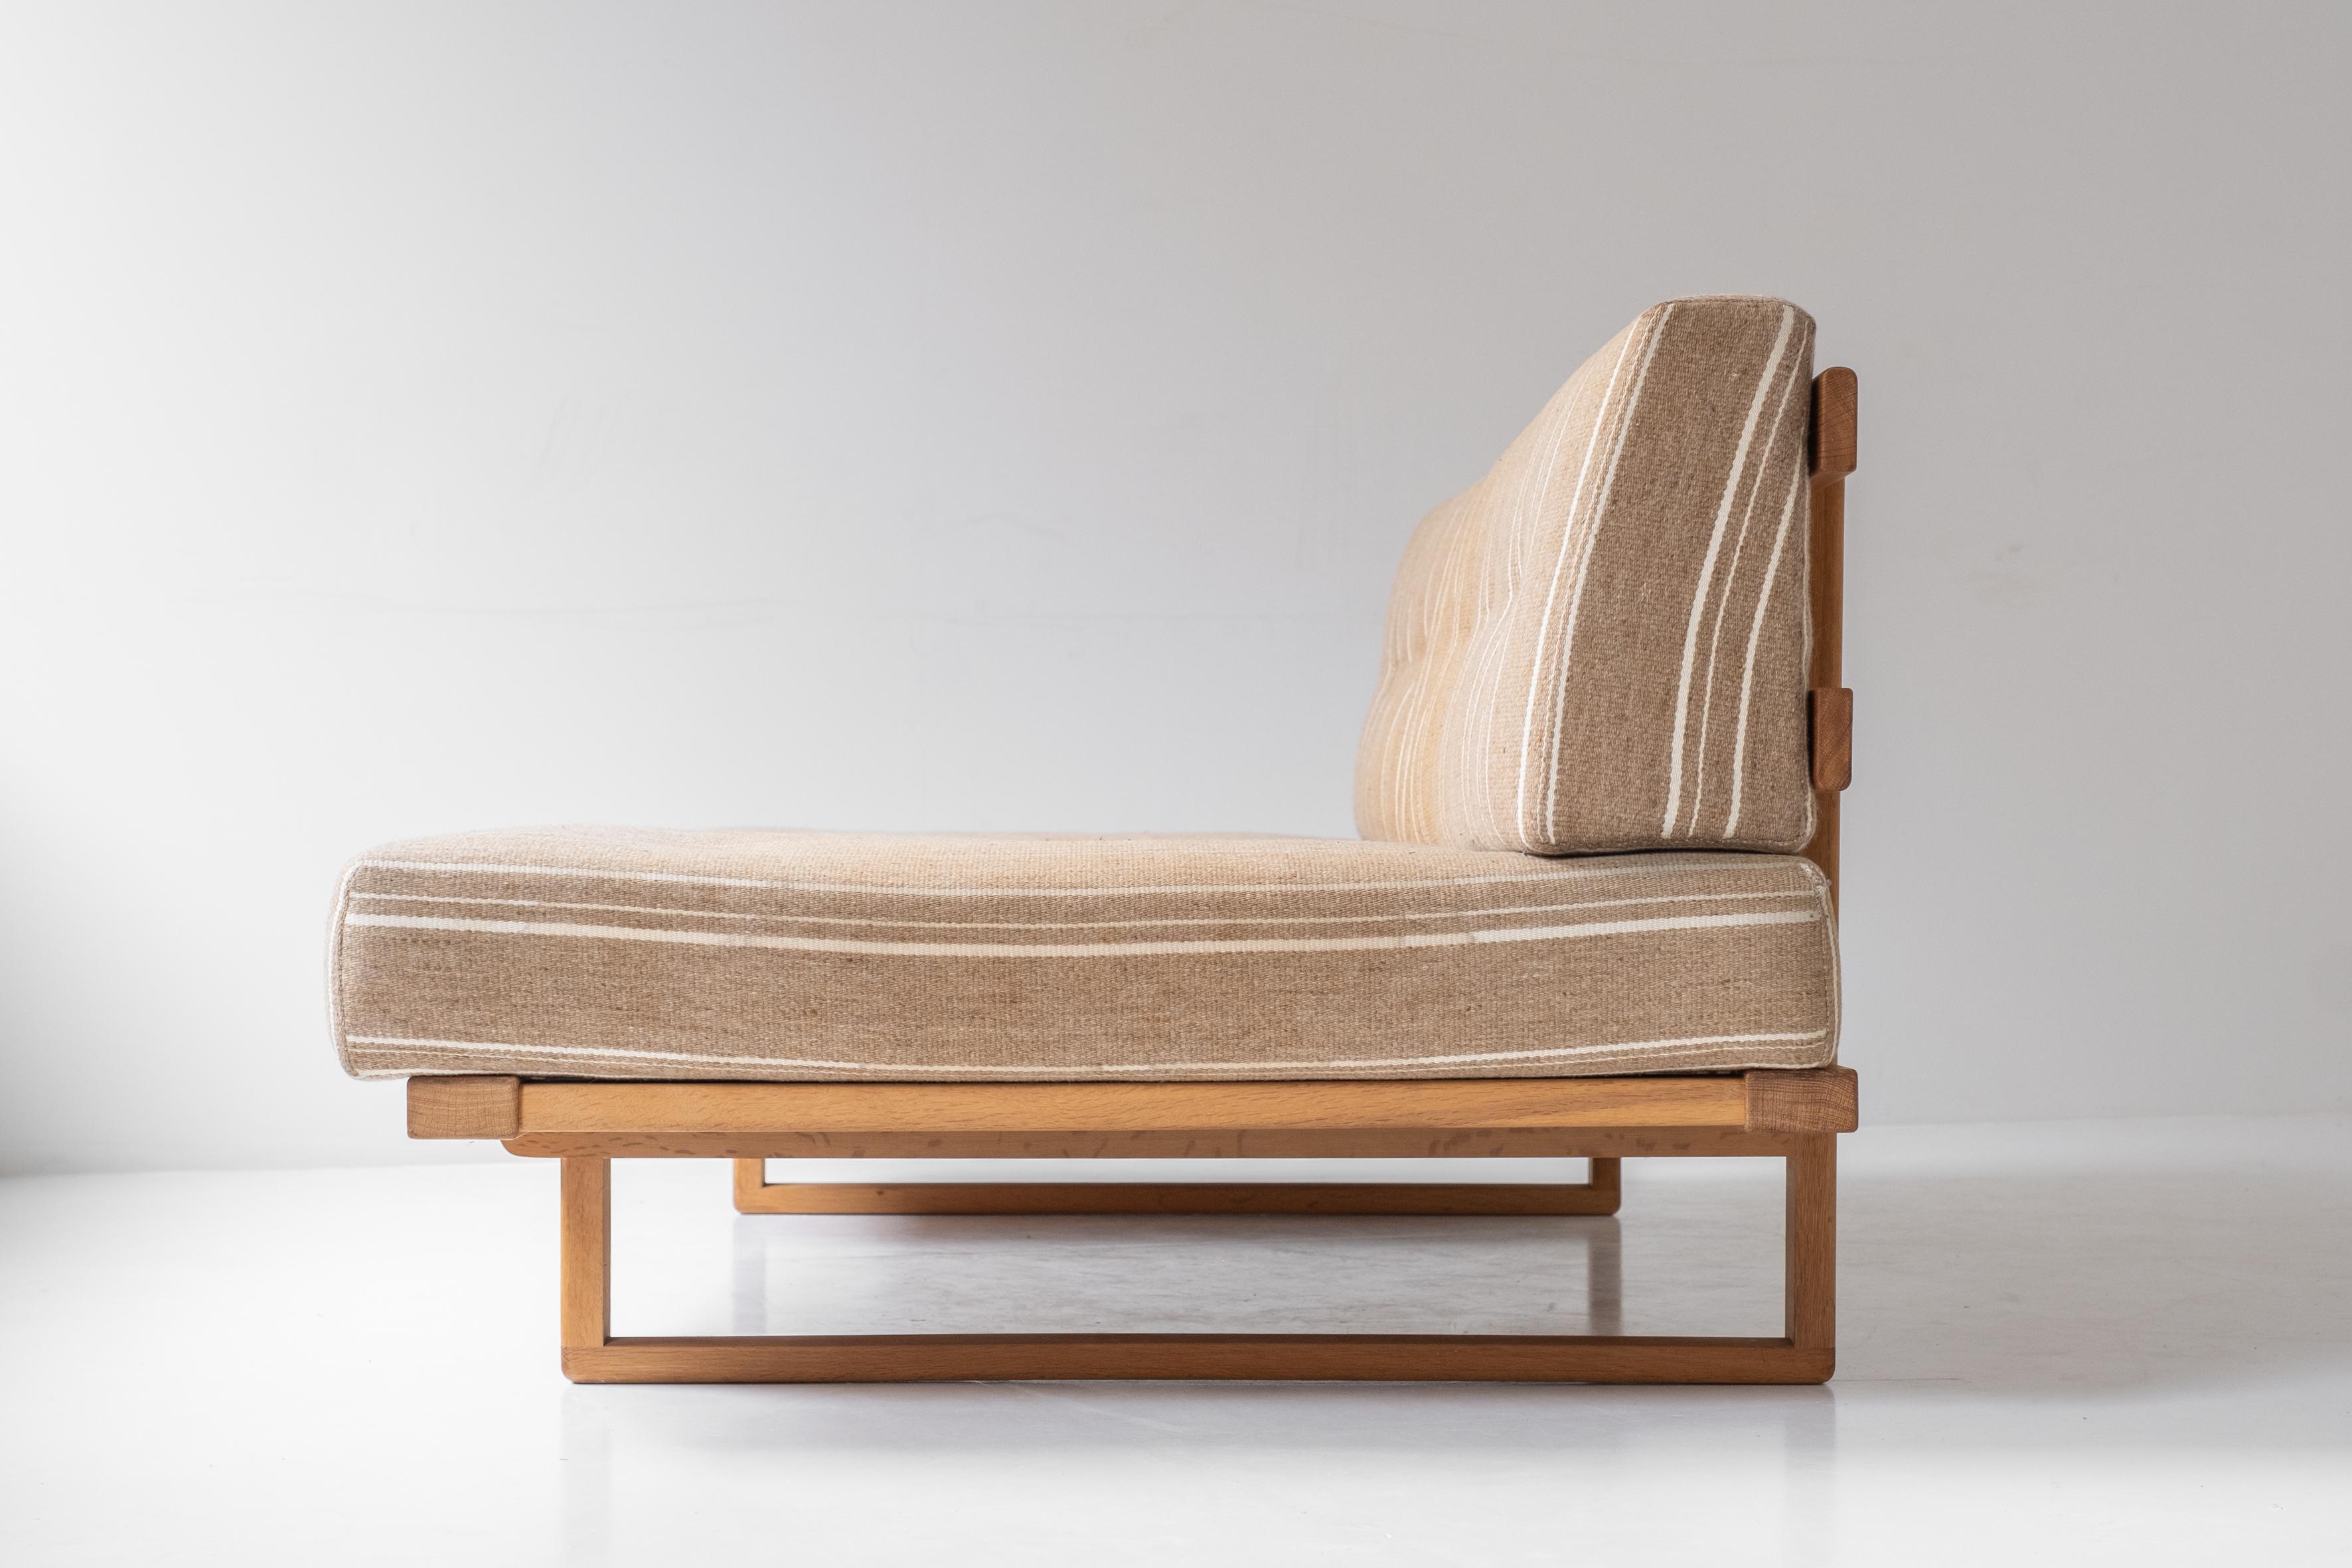 Brass Sofa or daybed ‘Model No 4311’ by Børge Mogensen for Fredericia, Denmark 1950s. For Sale